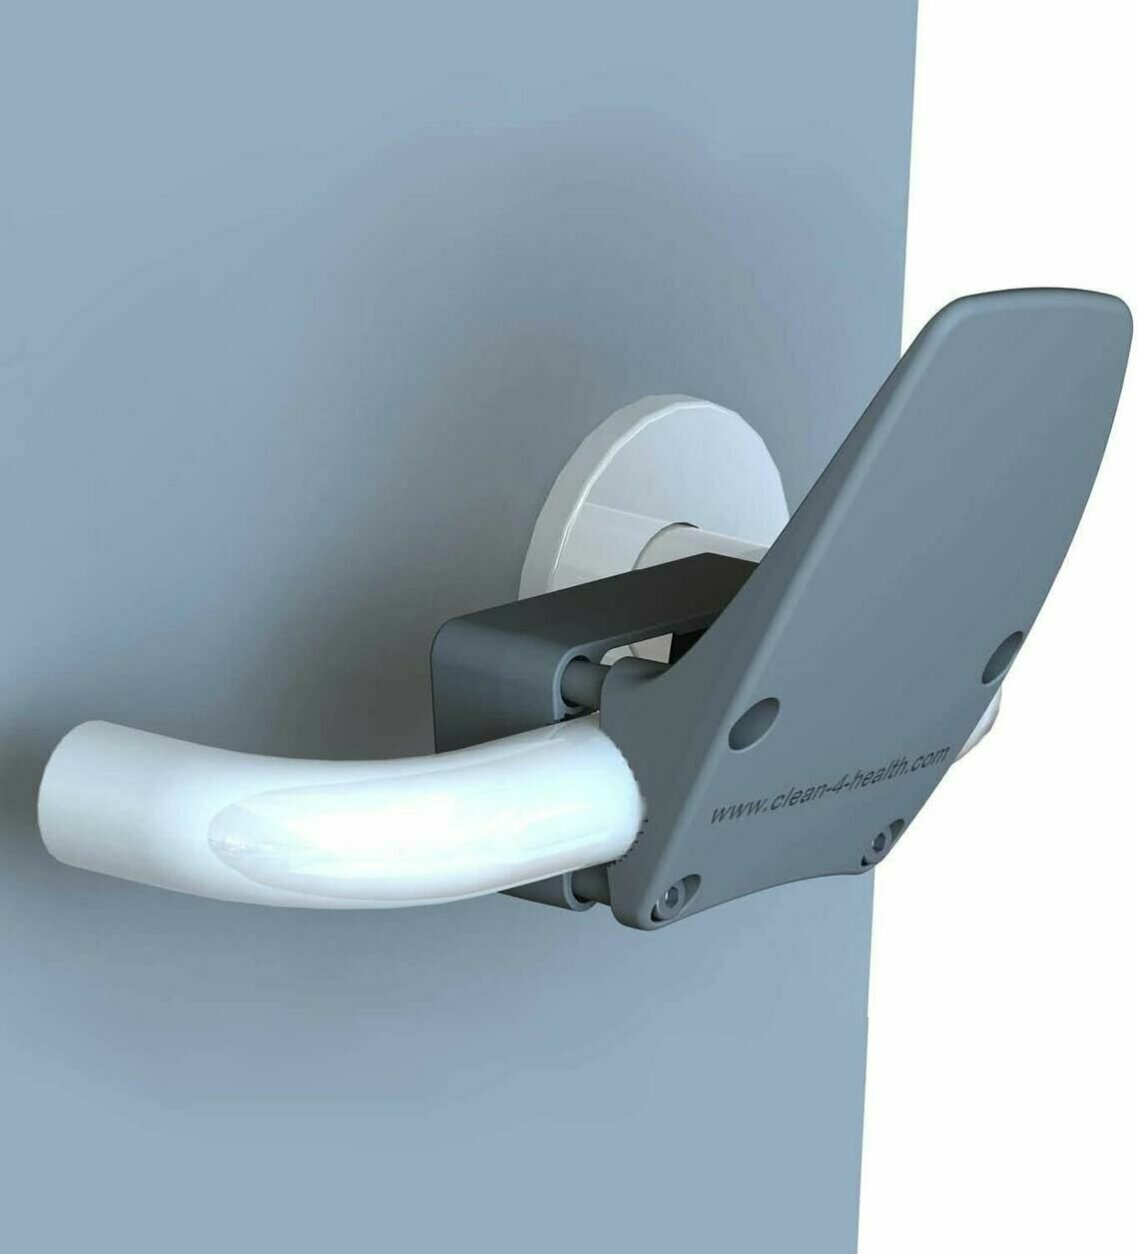 <h3><a href="https://www.etsy.com/listing/891190479/2-hands-free-door-opener-for-round-and?ref=search_recently_viewed-2" target="_blank" rel="noopener">Hands-free door opener</a> ($25.22)</h3>
<p>There are a few of these out there on Etsy and elsewhere. This German-made one is apparently easy to assemble and doesn&#8217;t require drilling into the door.</p>
